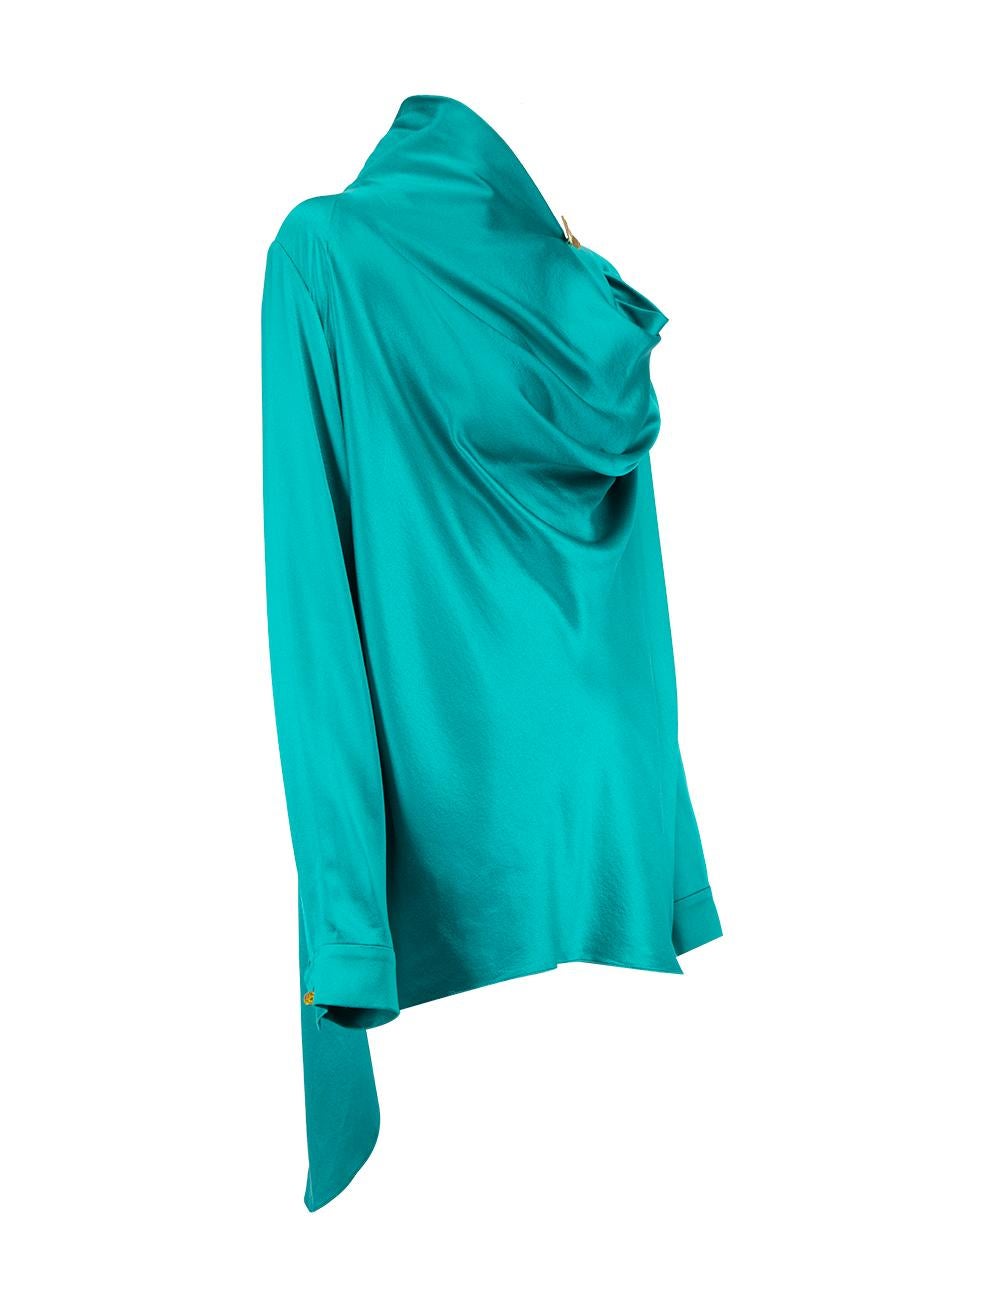 CONDITION is Very good. Hardly any visible wear to blouse is evident on this used Roksanda designer resale item. Details Teal Silk Blouse Drape ruched turtleneck front neckline Keyhole back neckline with buttons closure Long sleeves Buttoned cuffs